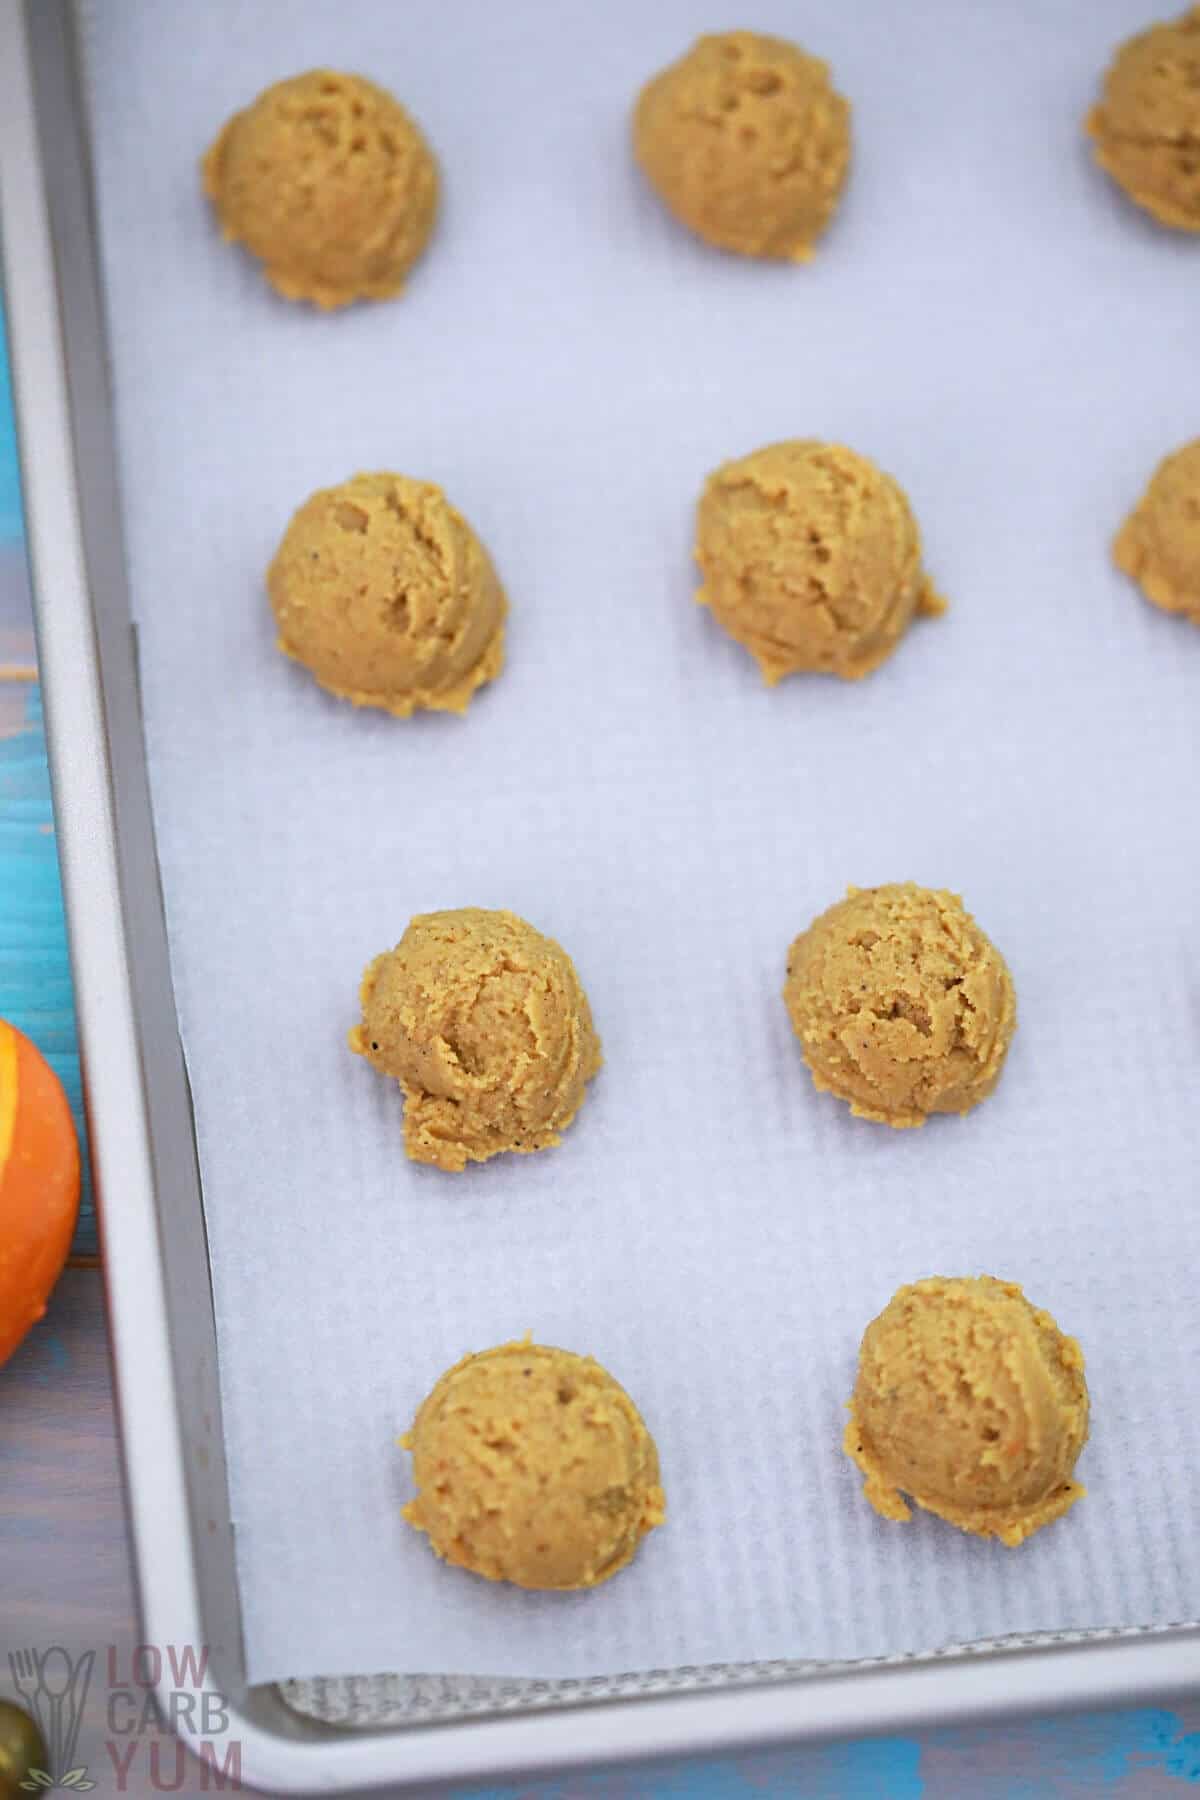 forming the pumpkin ball filling on lined baking sheet